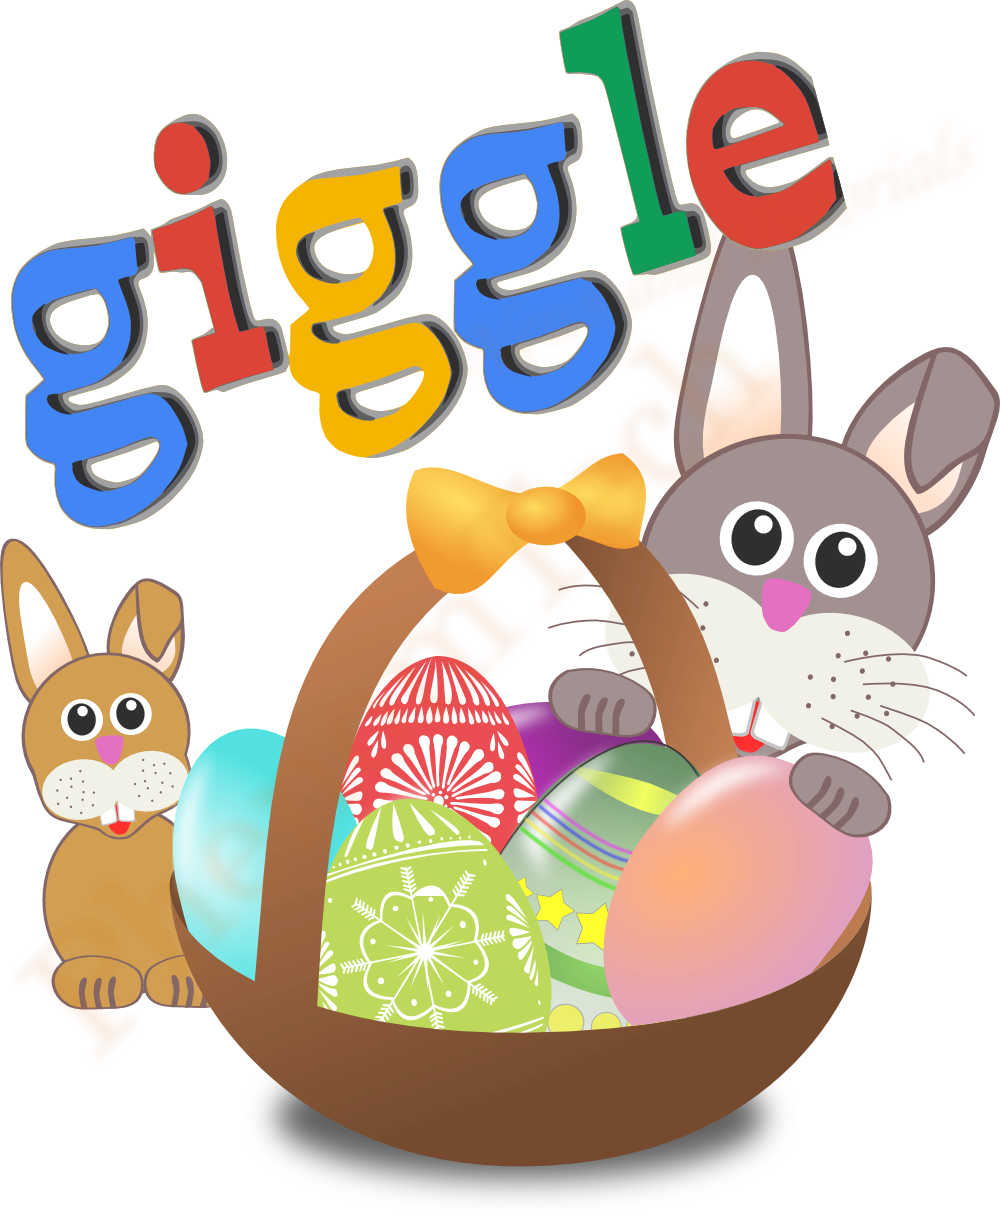 Google Has Plenty Of Secret Easter Eggs And Hacks Hidden - Easter Journal 7x10 Notebook With Lined Pages: Fun (1000x1215)